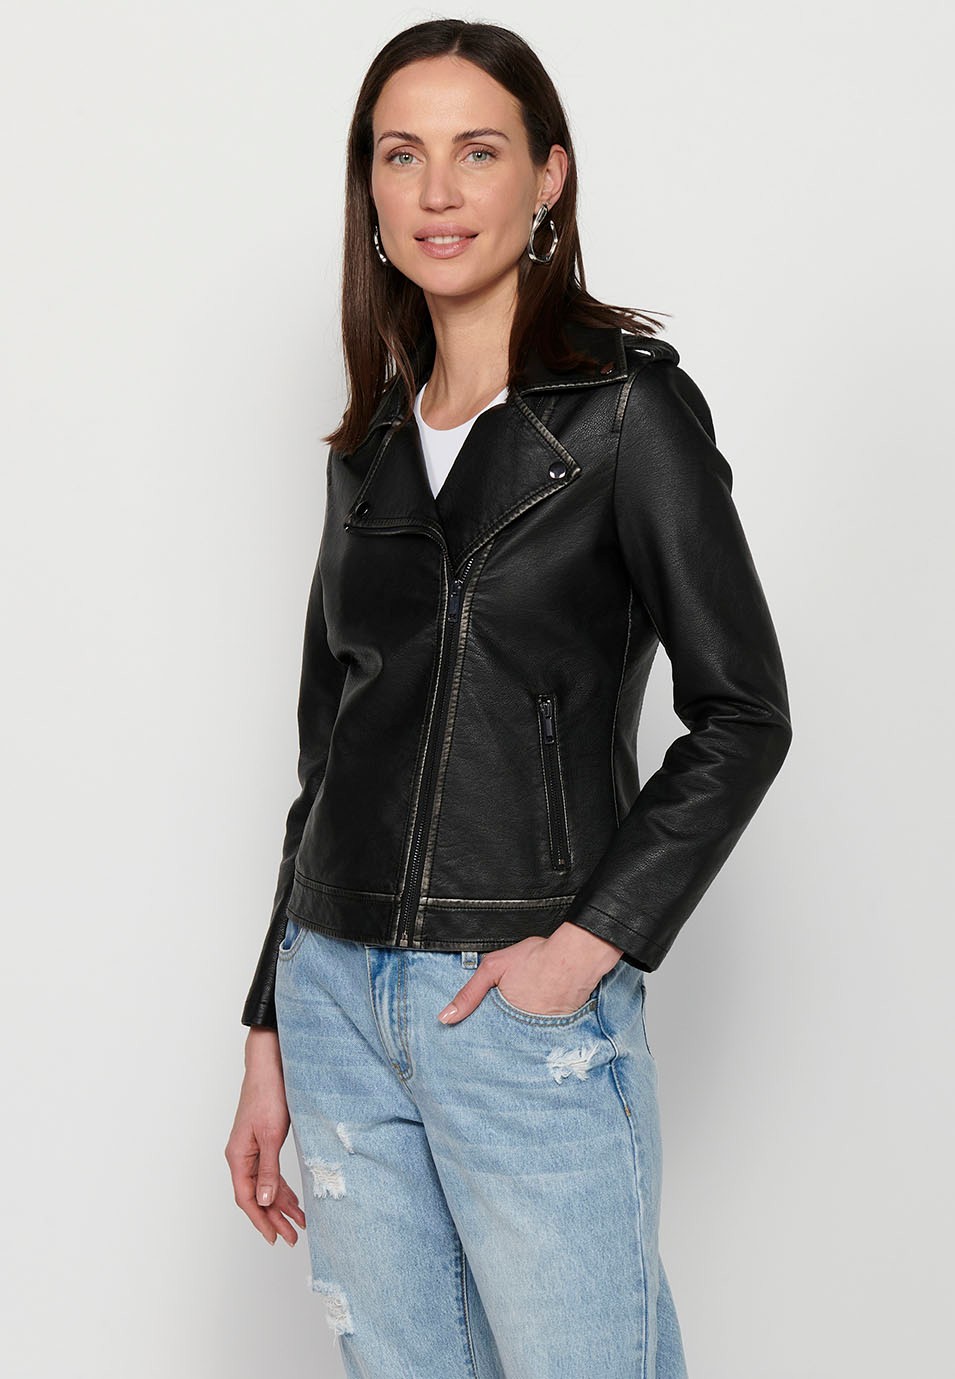 Leather-effect double-breasted jacket with lapel collar and front zipper closure in Black for Women 1